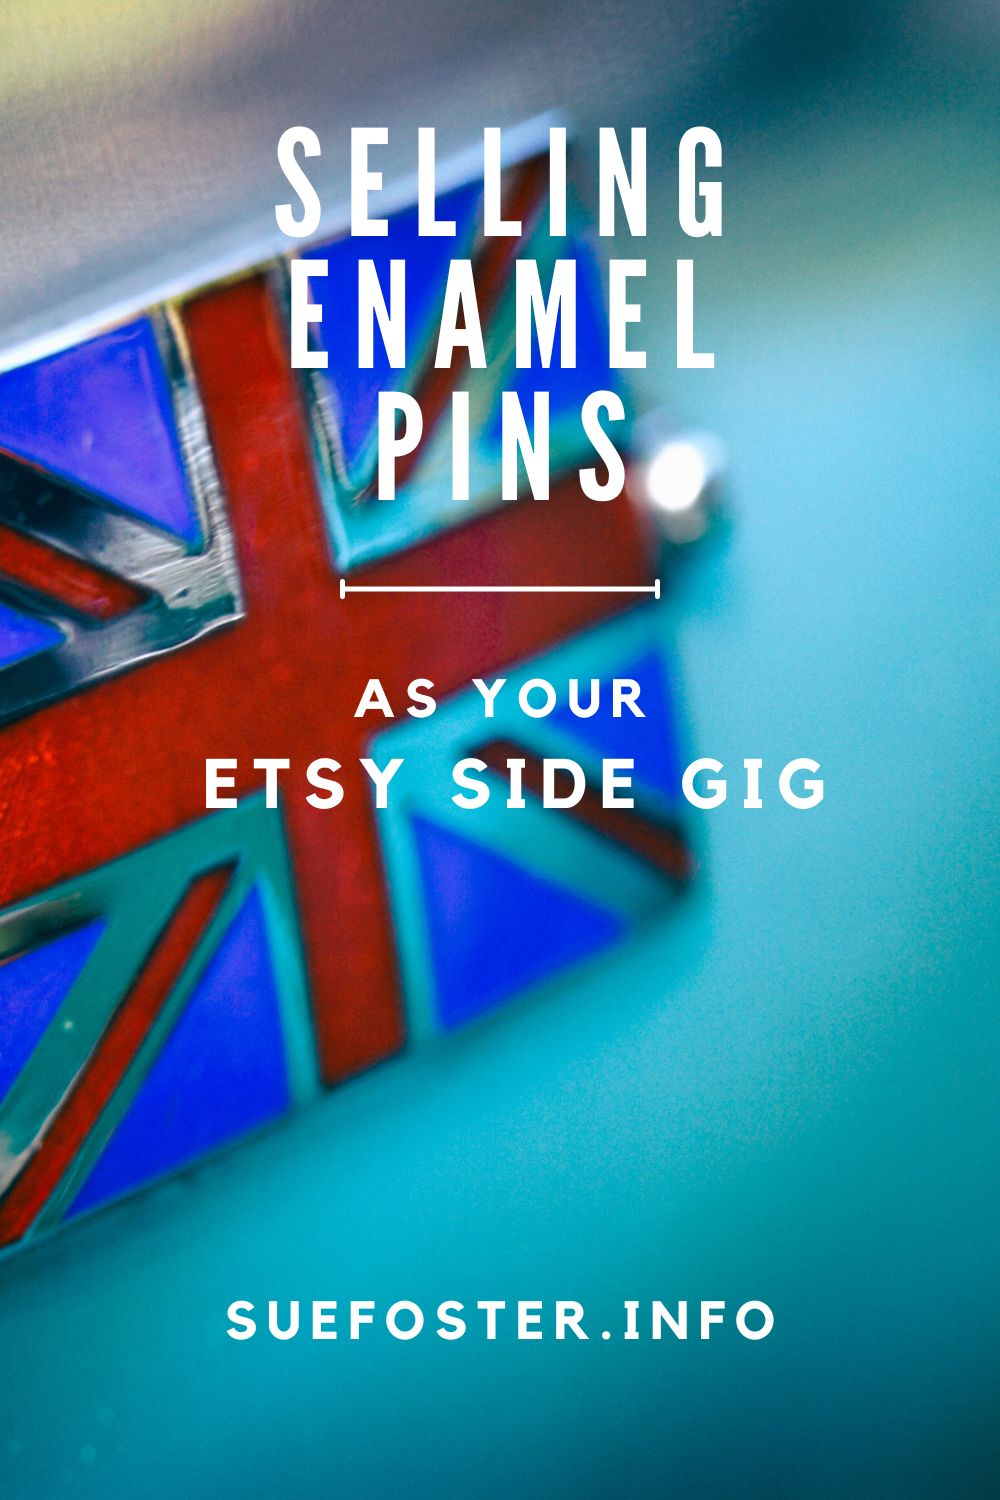 Turn your artistic talent into financial freedom. Explore various enamel pin types, design tips, and how to sell on Etsy.